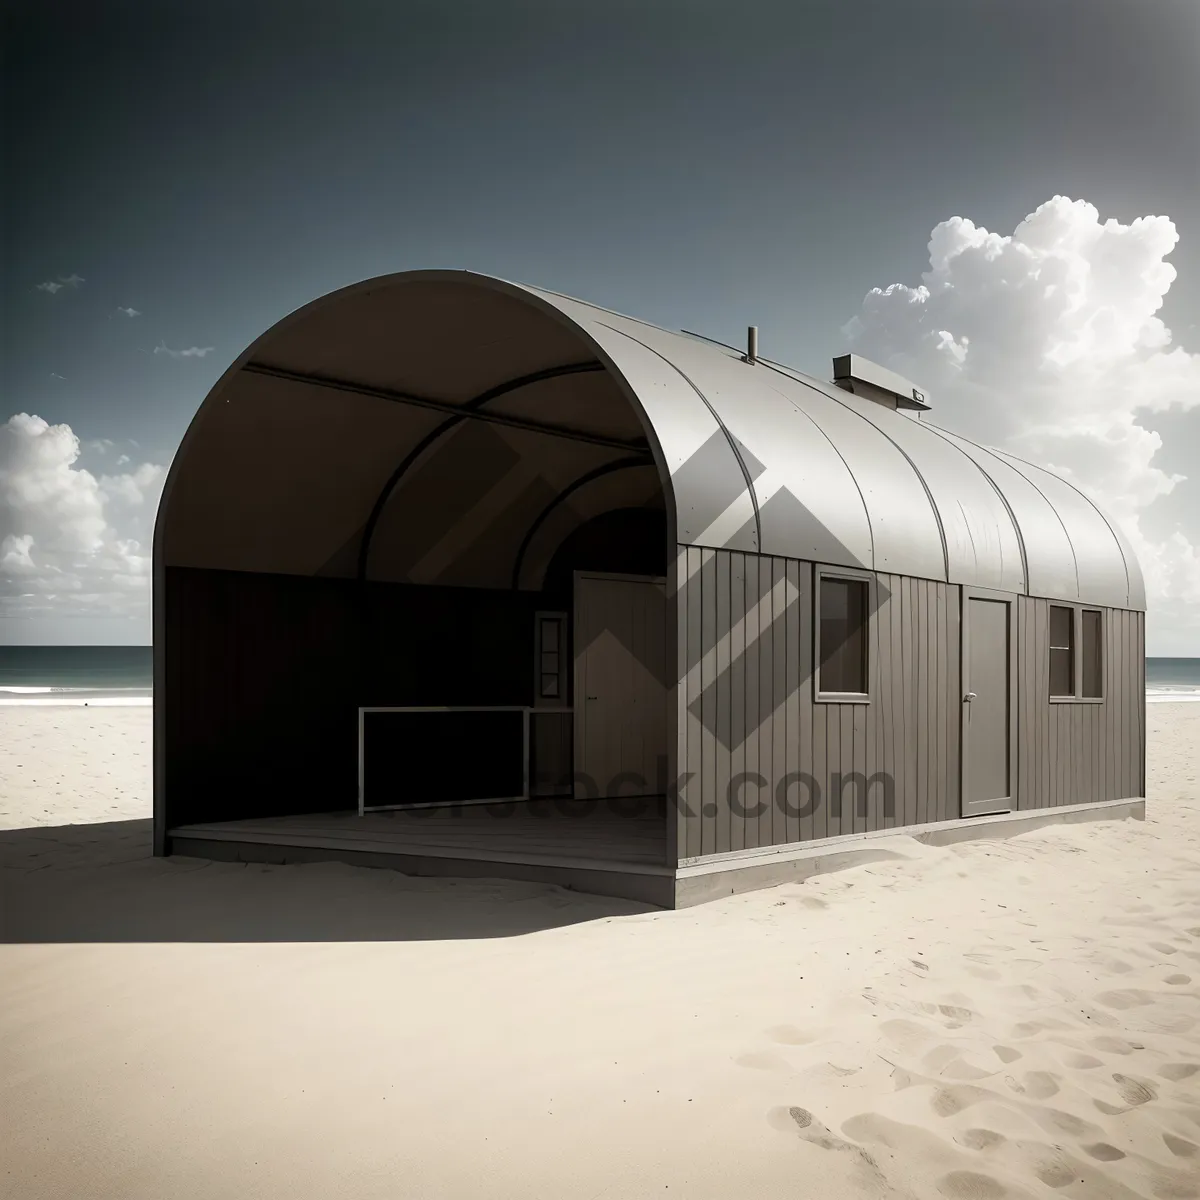 Picture of Sky Dome Hut - Architectural Shelter for Travel